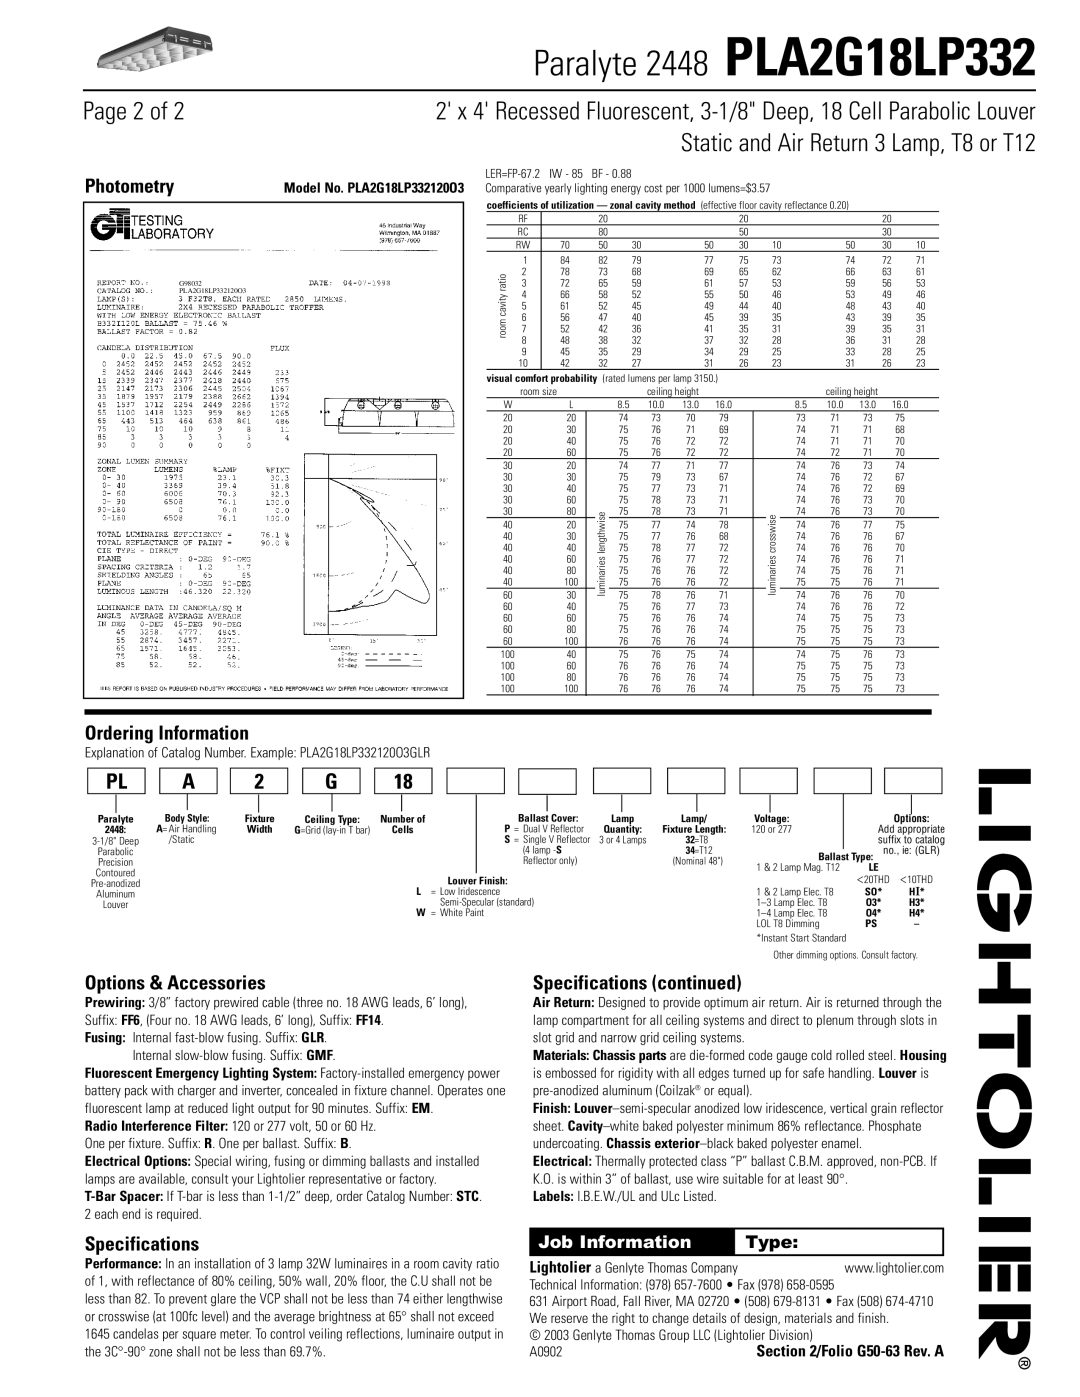 Lightolier PLA2G18LP332 dimensions Page 2 of, Photometry, Ordering Information, Options & Accessories, Specifications, Type 